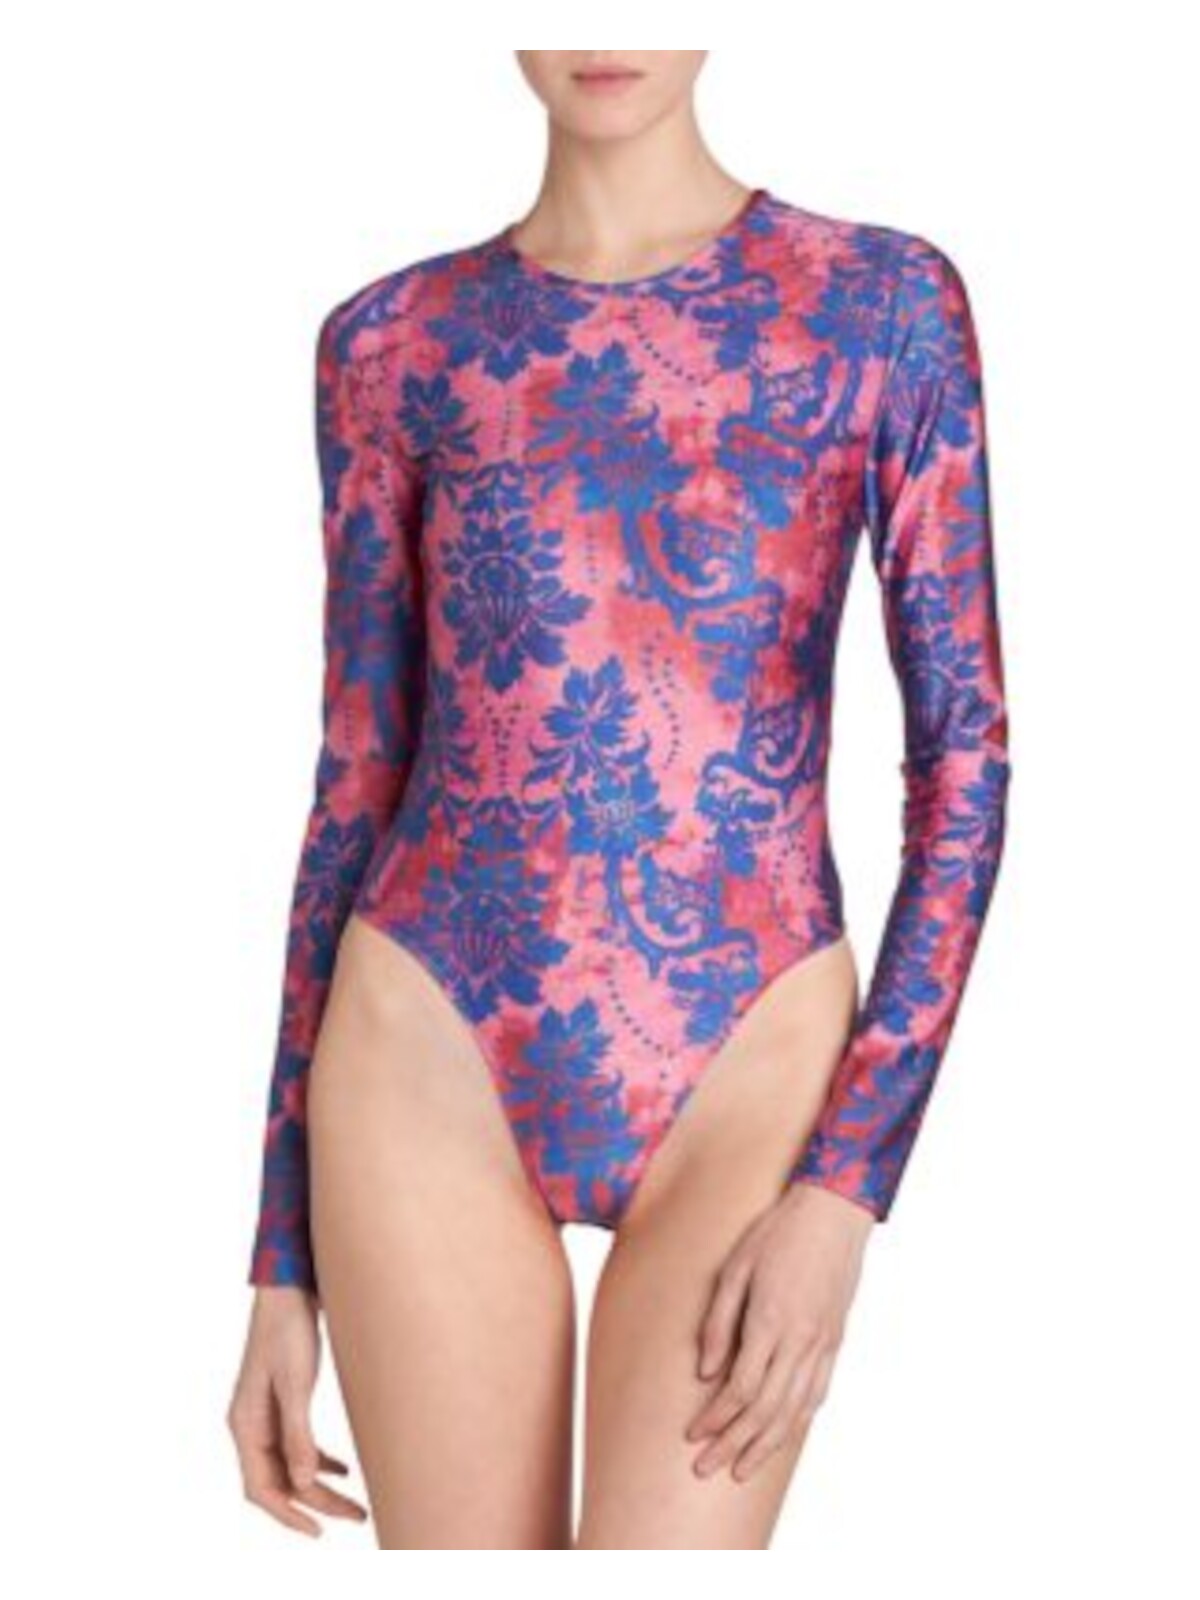 VERSACE JEANS COUTURE Womens Pink Floral Long Sleeve Crew Neck Body Suit Top 0